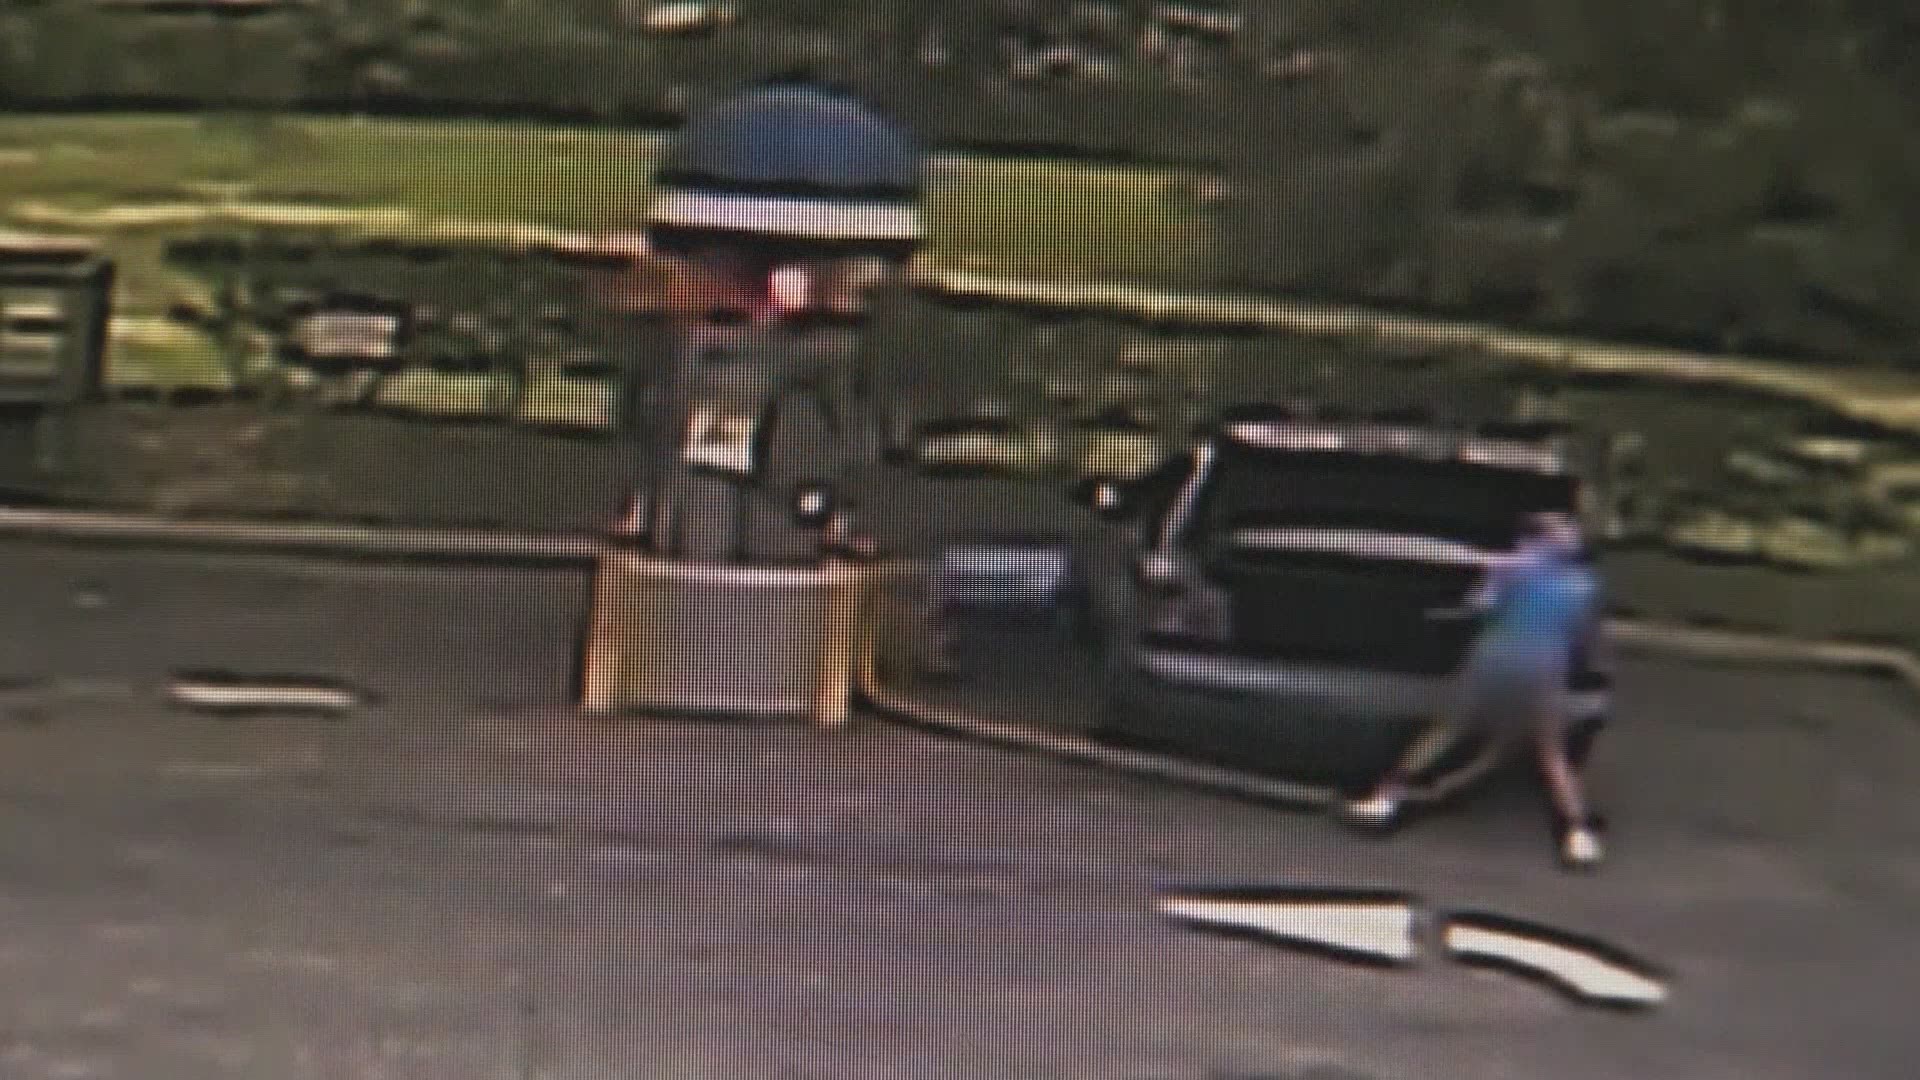 There was an explosion at the vacuums yesterday in Orlando, Florida and it was all caught on camera.